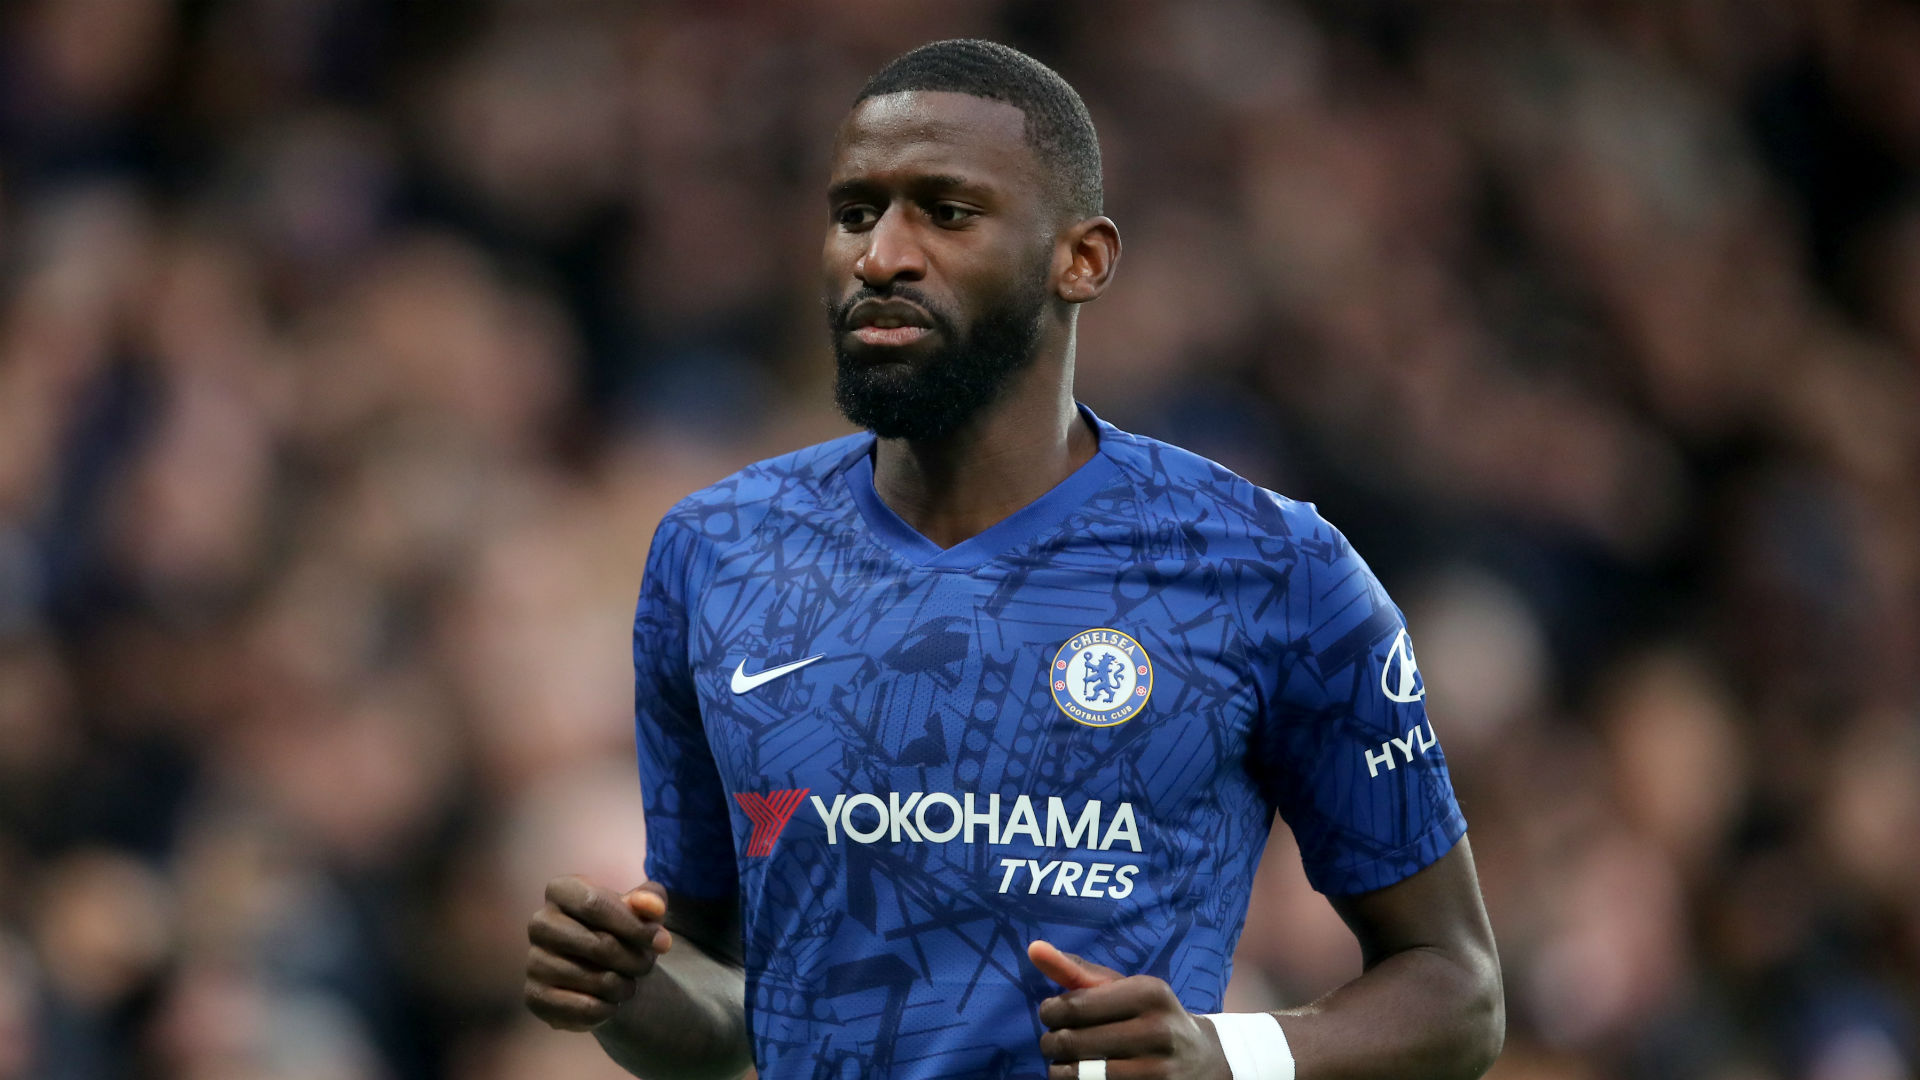 Antonio Rudiger complained of racist abuse during December's match at Tottenham and the German fears fans will continue to avoid justice.